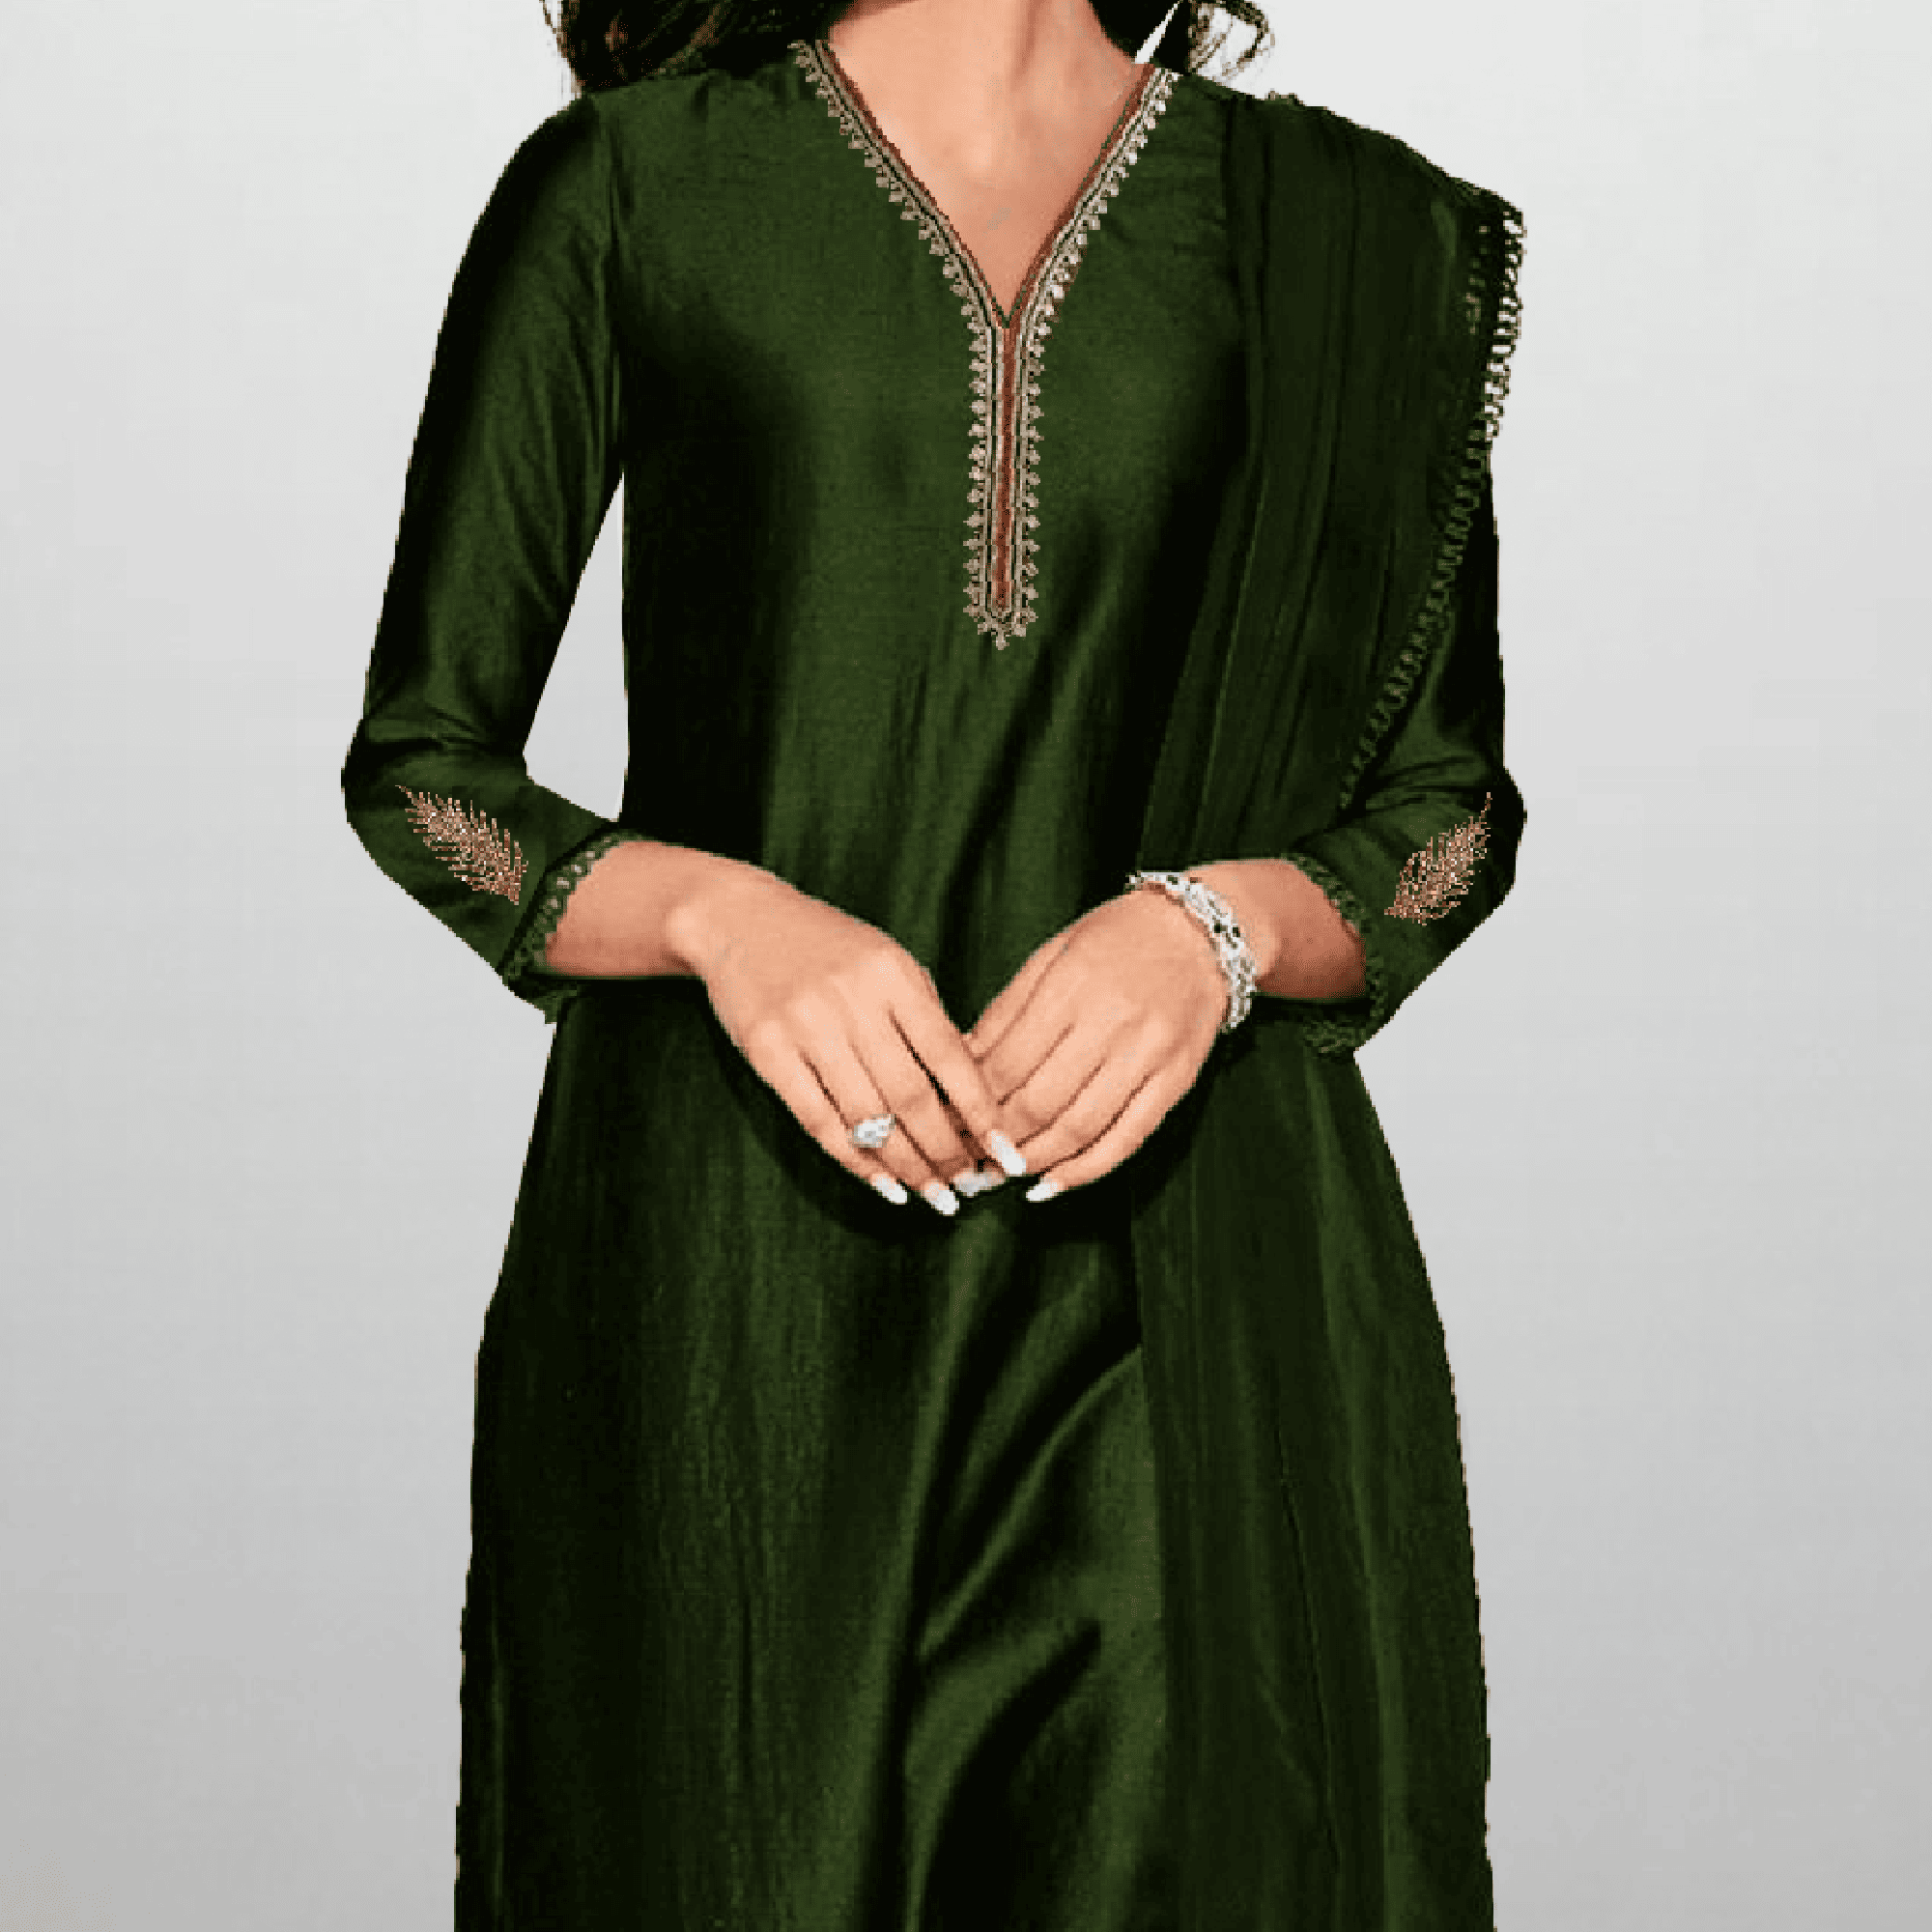 Women's Sleeve embroidered  Green  Kurti with pant and Dupatta-RWKS061